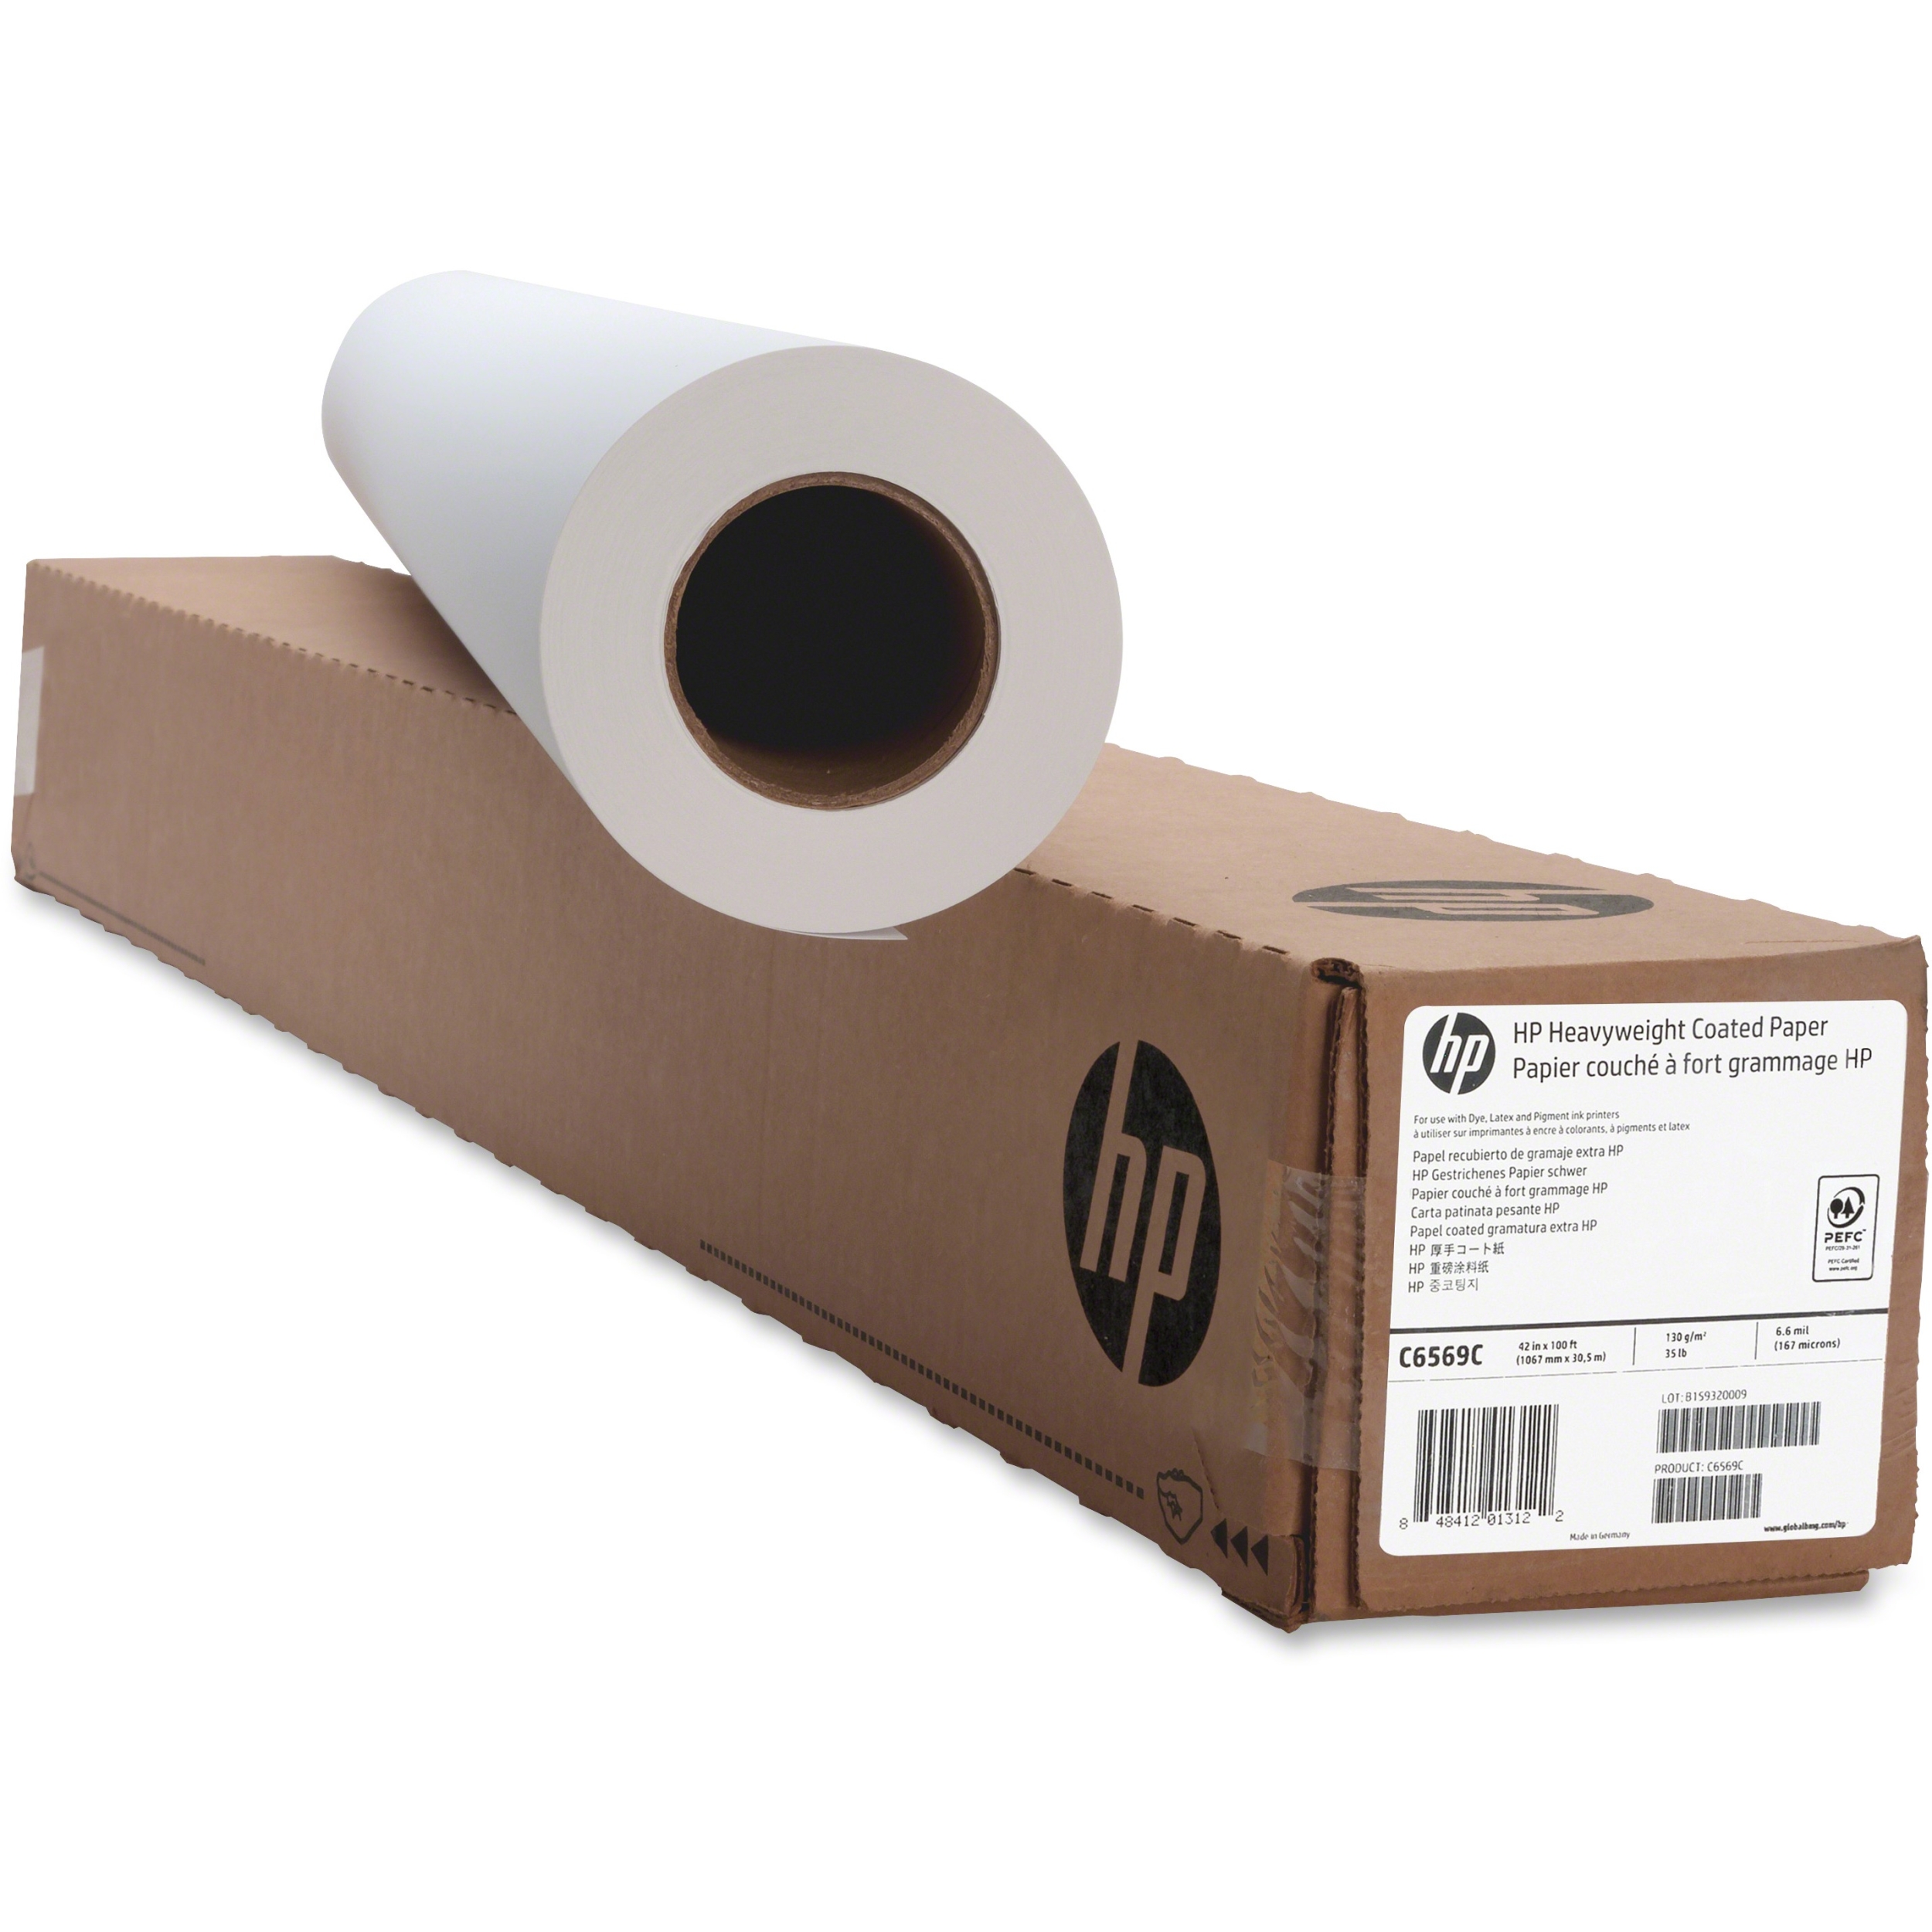 HP C6569C Heavyweight Coated Paper - 42" x 100' paper for HP designjets - 1 roll - image 2 of 3